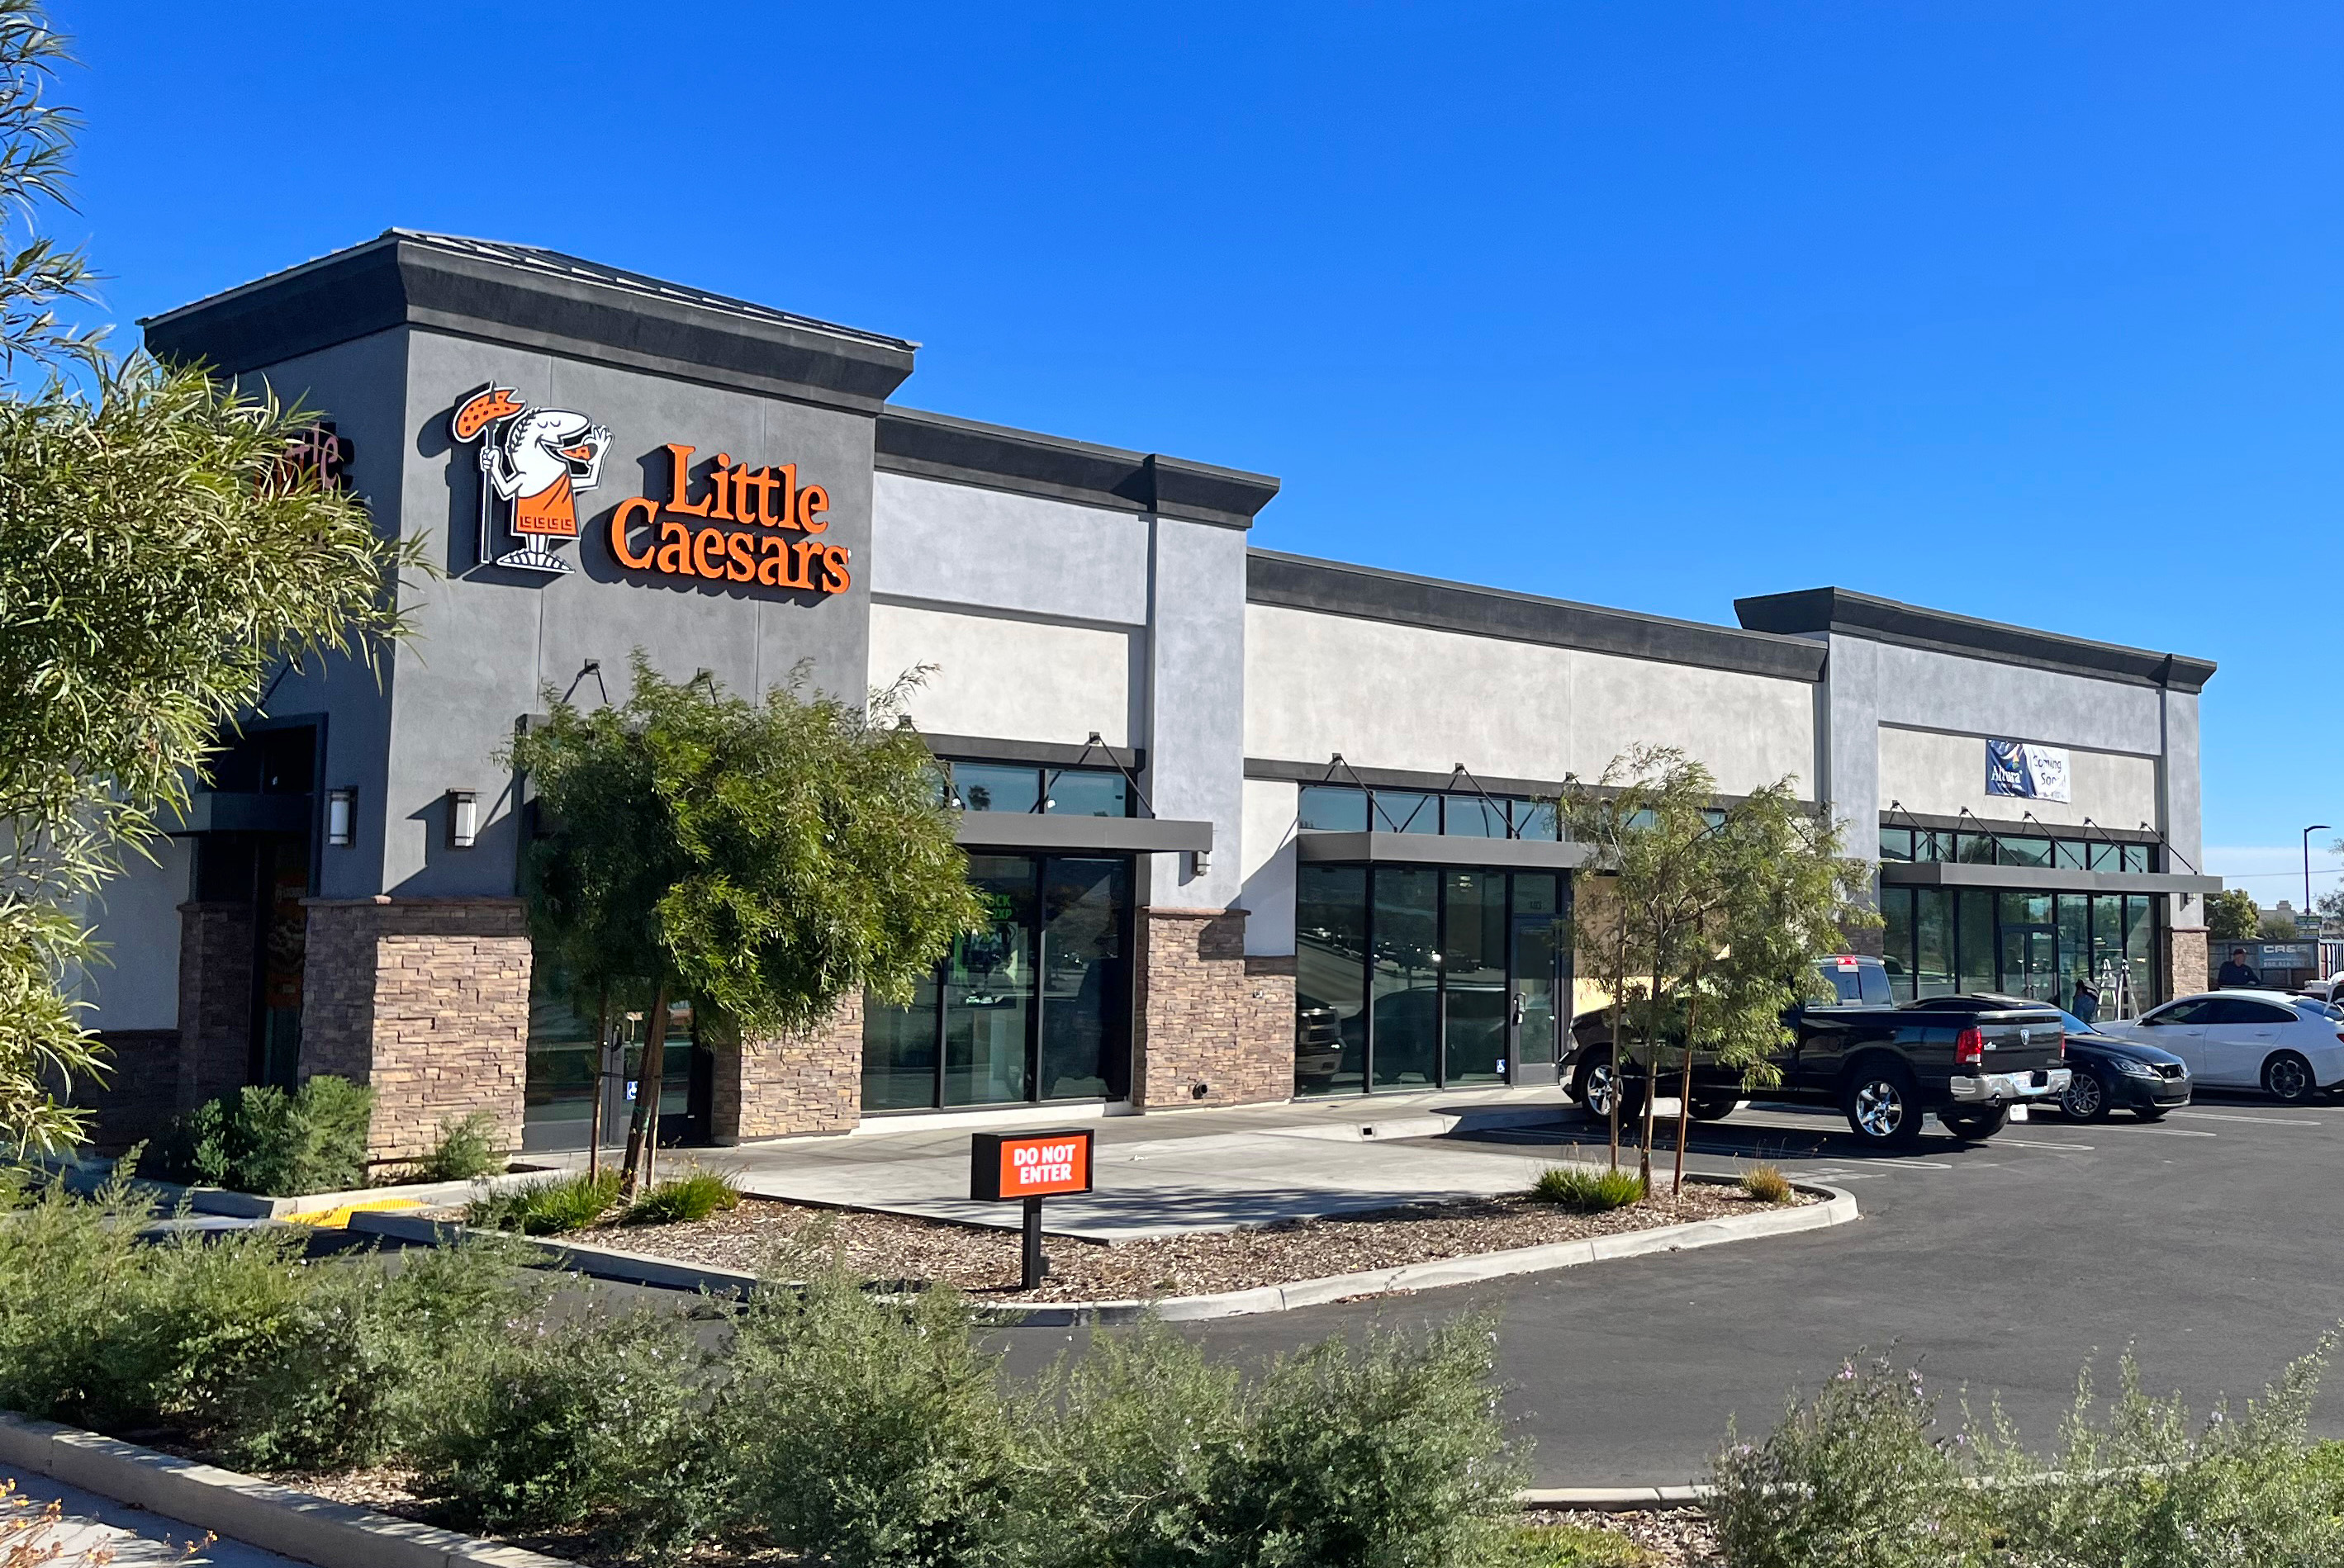 Hanley Investment Group Arranges Sale of Newly Built Multi-Tenant Retail Pad Leased to Altura Credit Union and Little Caesars Drive-Thru in Southern California’s Inland Empire for $4.05 Million